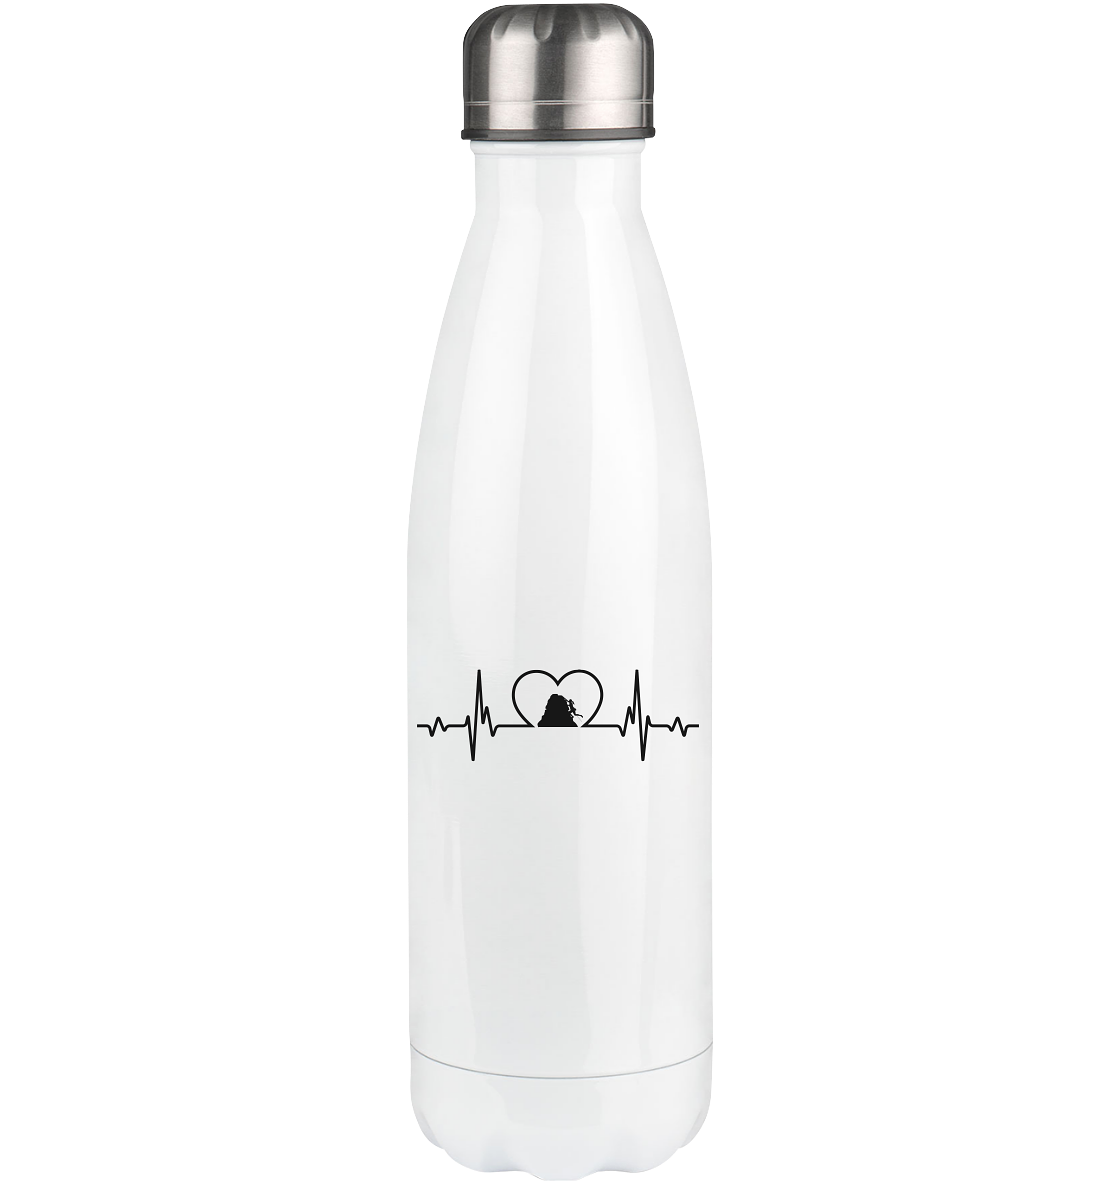 Heartbeat Heart and Climbing 1 - Edelstahl Thermosflasche klettern 500ml